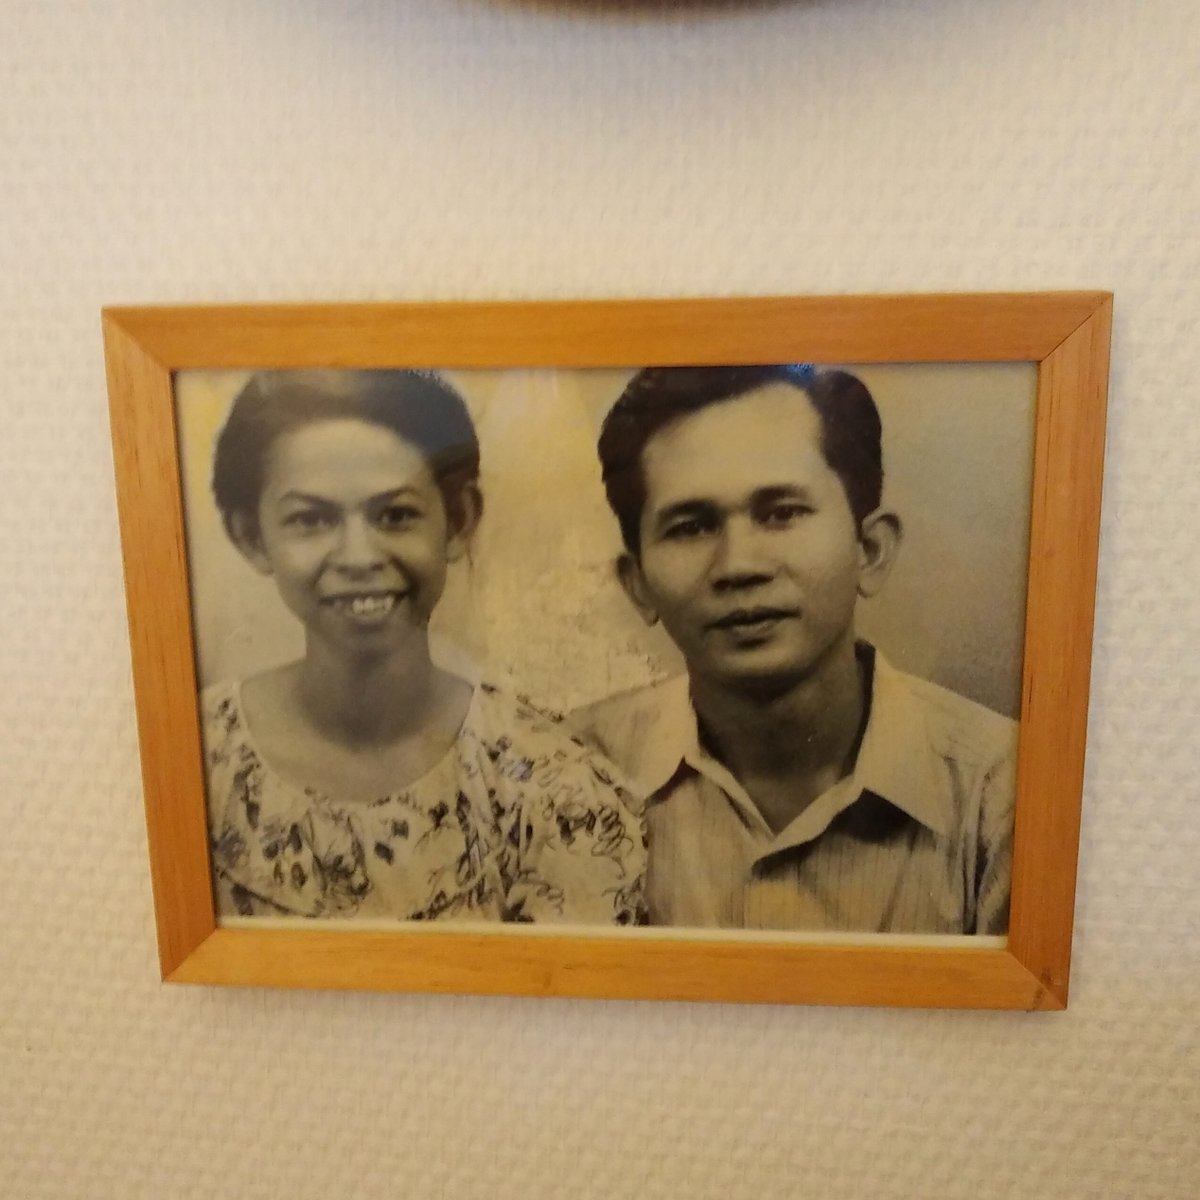 I heard from Francisca, in my opinion the hero of the book, after she received her physical copy and saw that I dedicated it to her (and to Benny Widyono). She thanked me, but she insisted that all the real heroes lost their lives in 1965. Here she is with her late husband, Zain